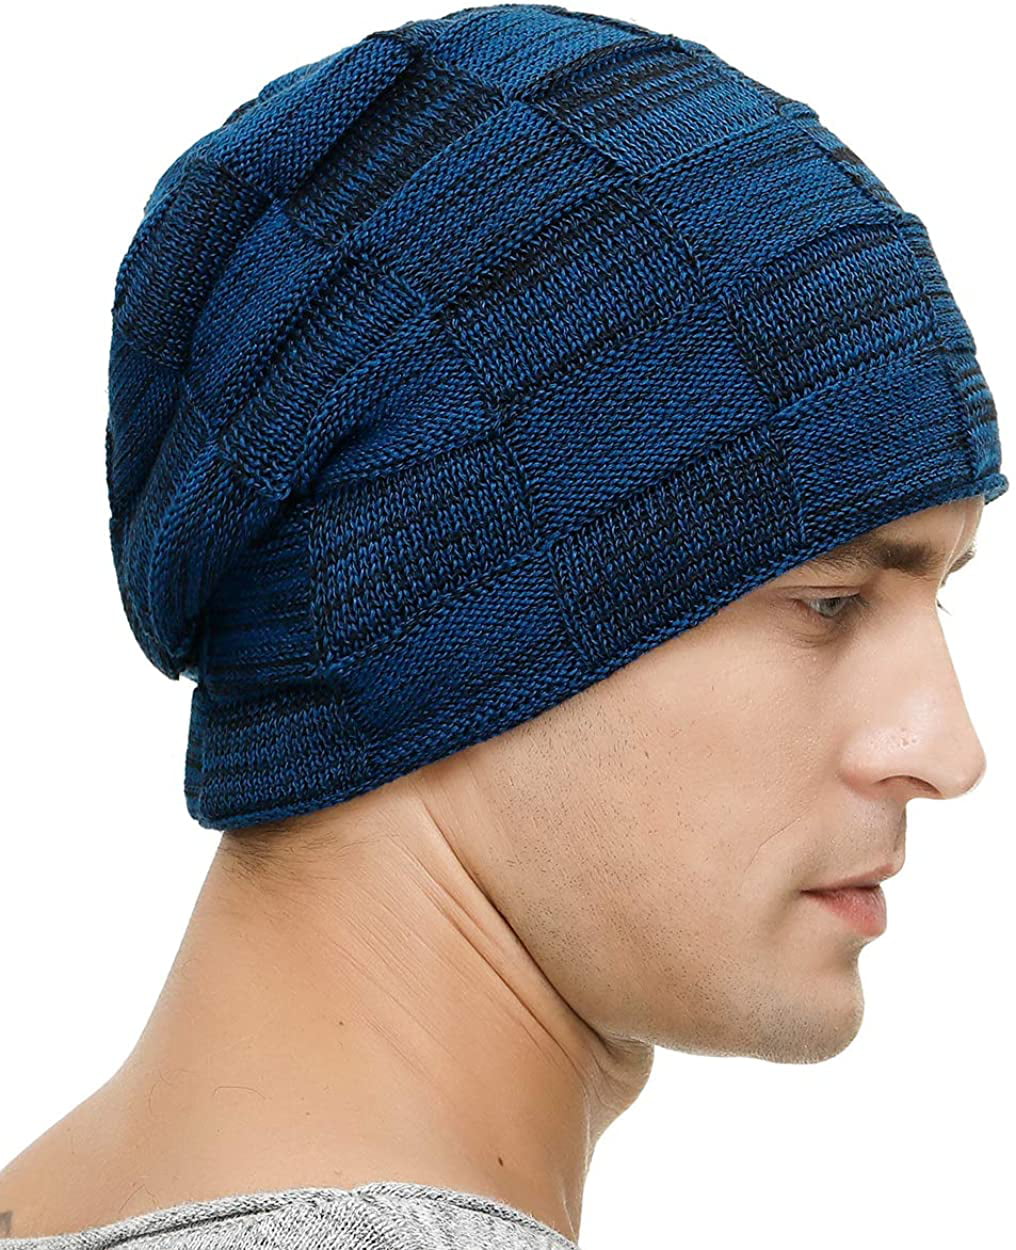 Vgogfly Slouchy Beanie for Men Winter Hats for Guys Cool Beanies Mens Lined Knit Warm Thick Skully Stocking Binie Hat 